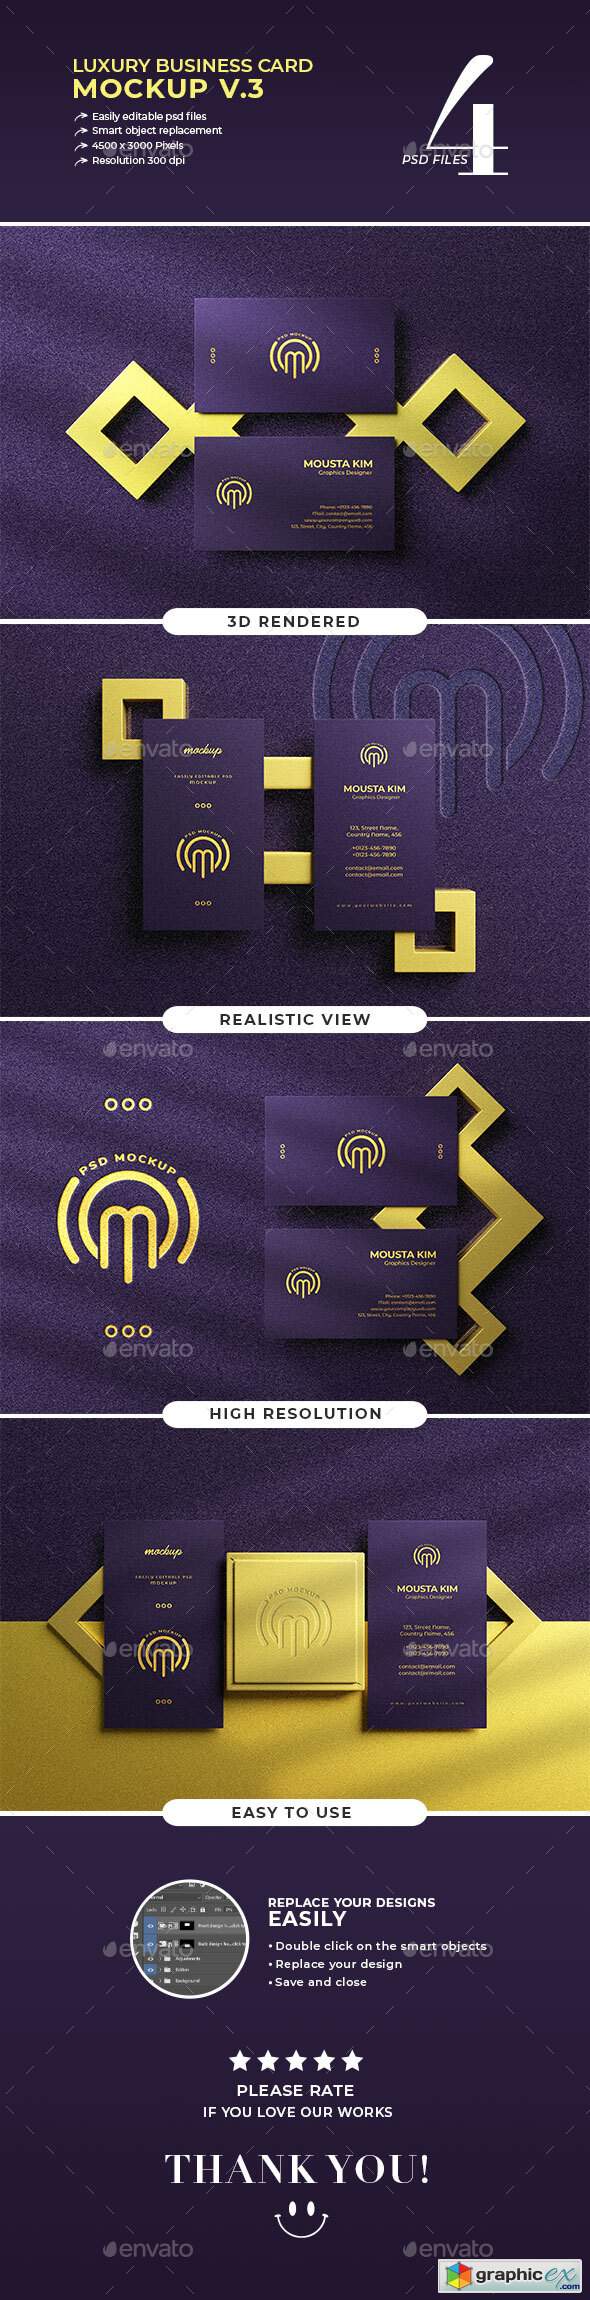 Download Luxury Business Card Mockup V 3 Free Download Vector Stock Image Photoshop Icon